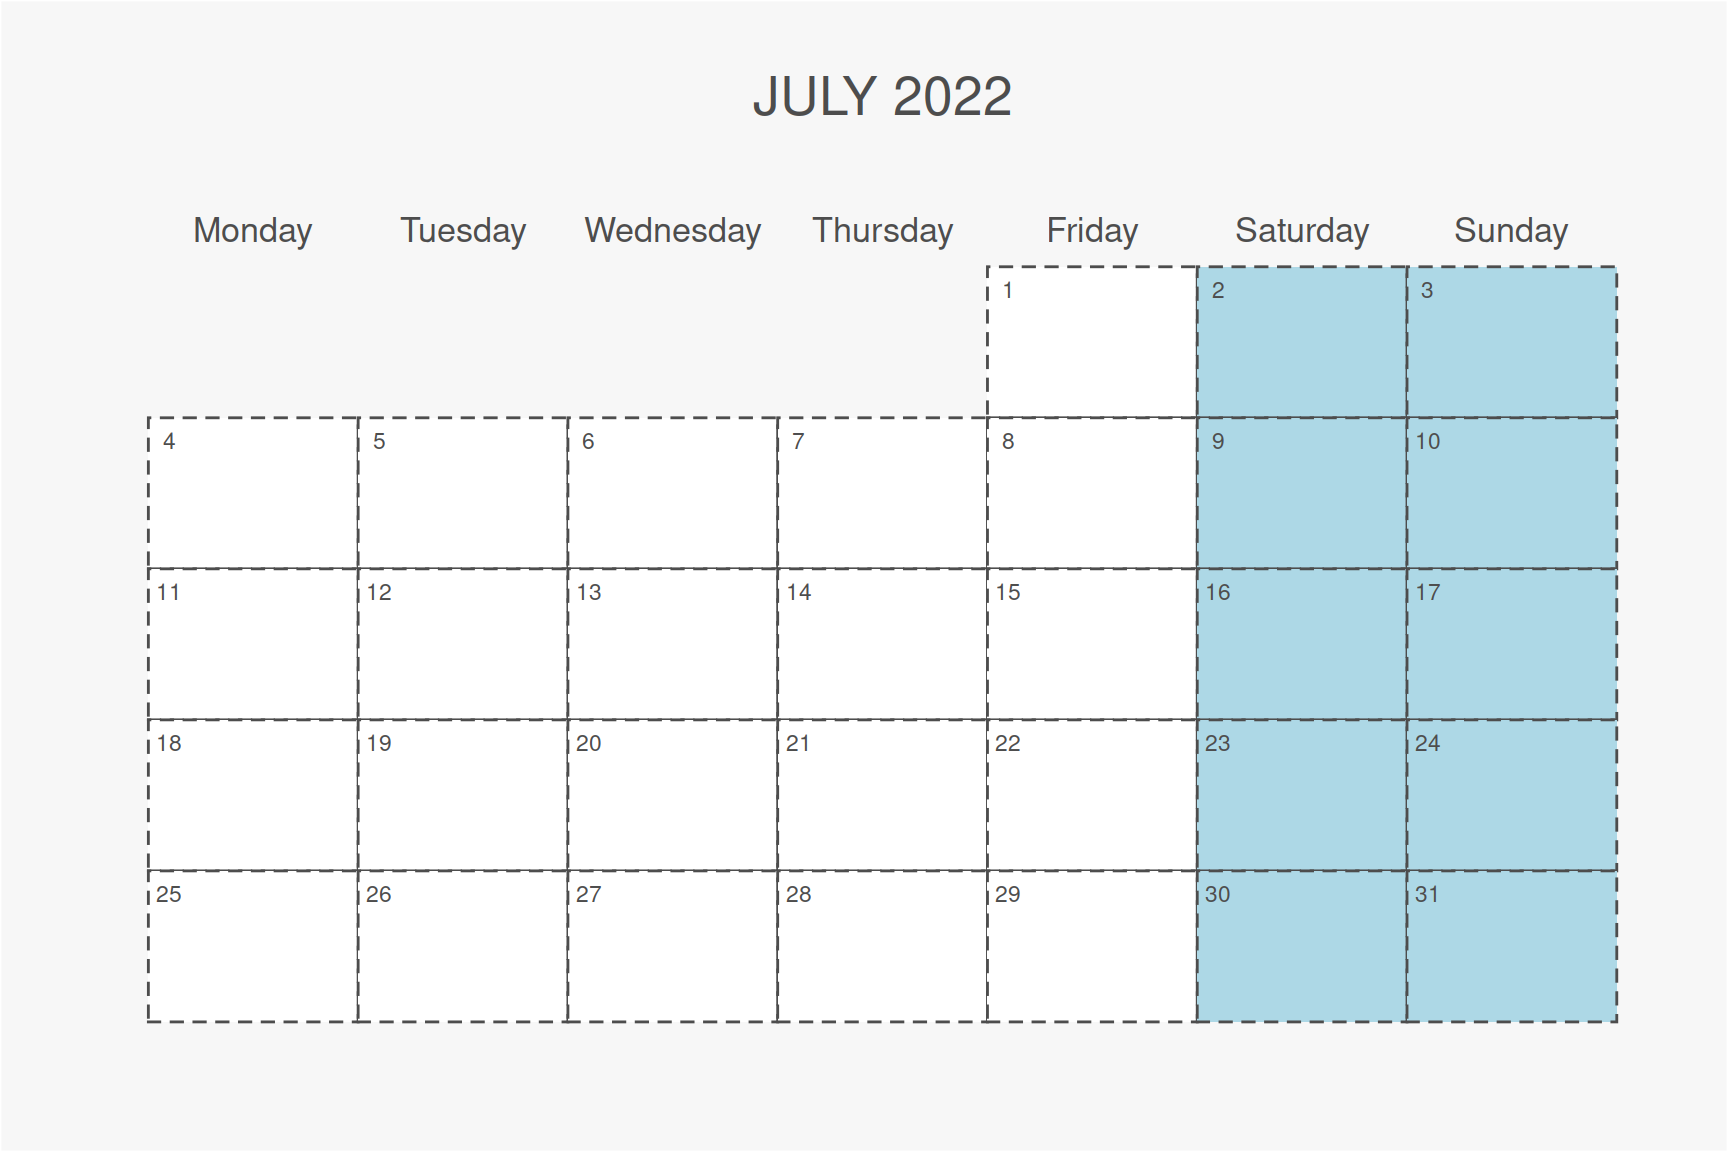 Customization of the monthly calendar in R